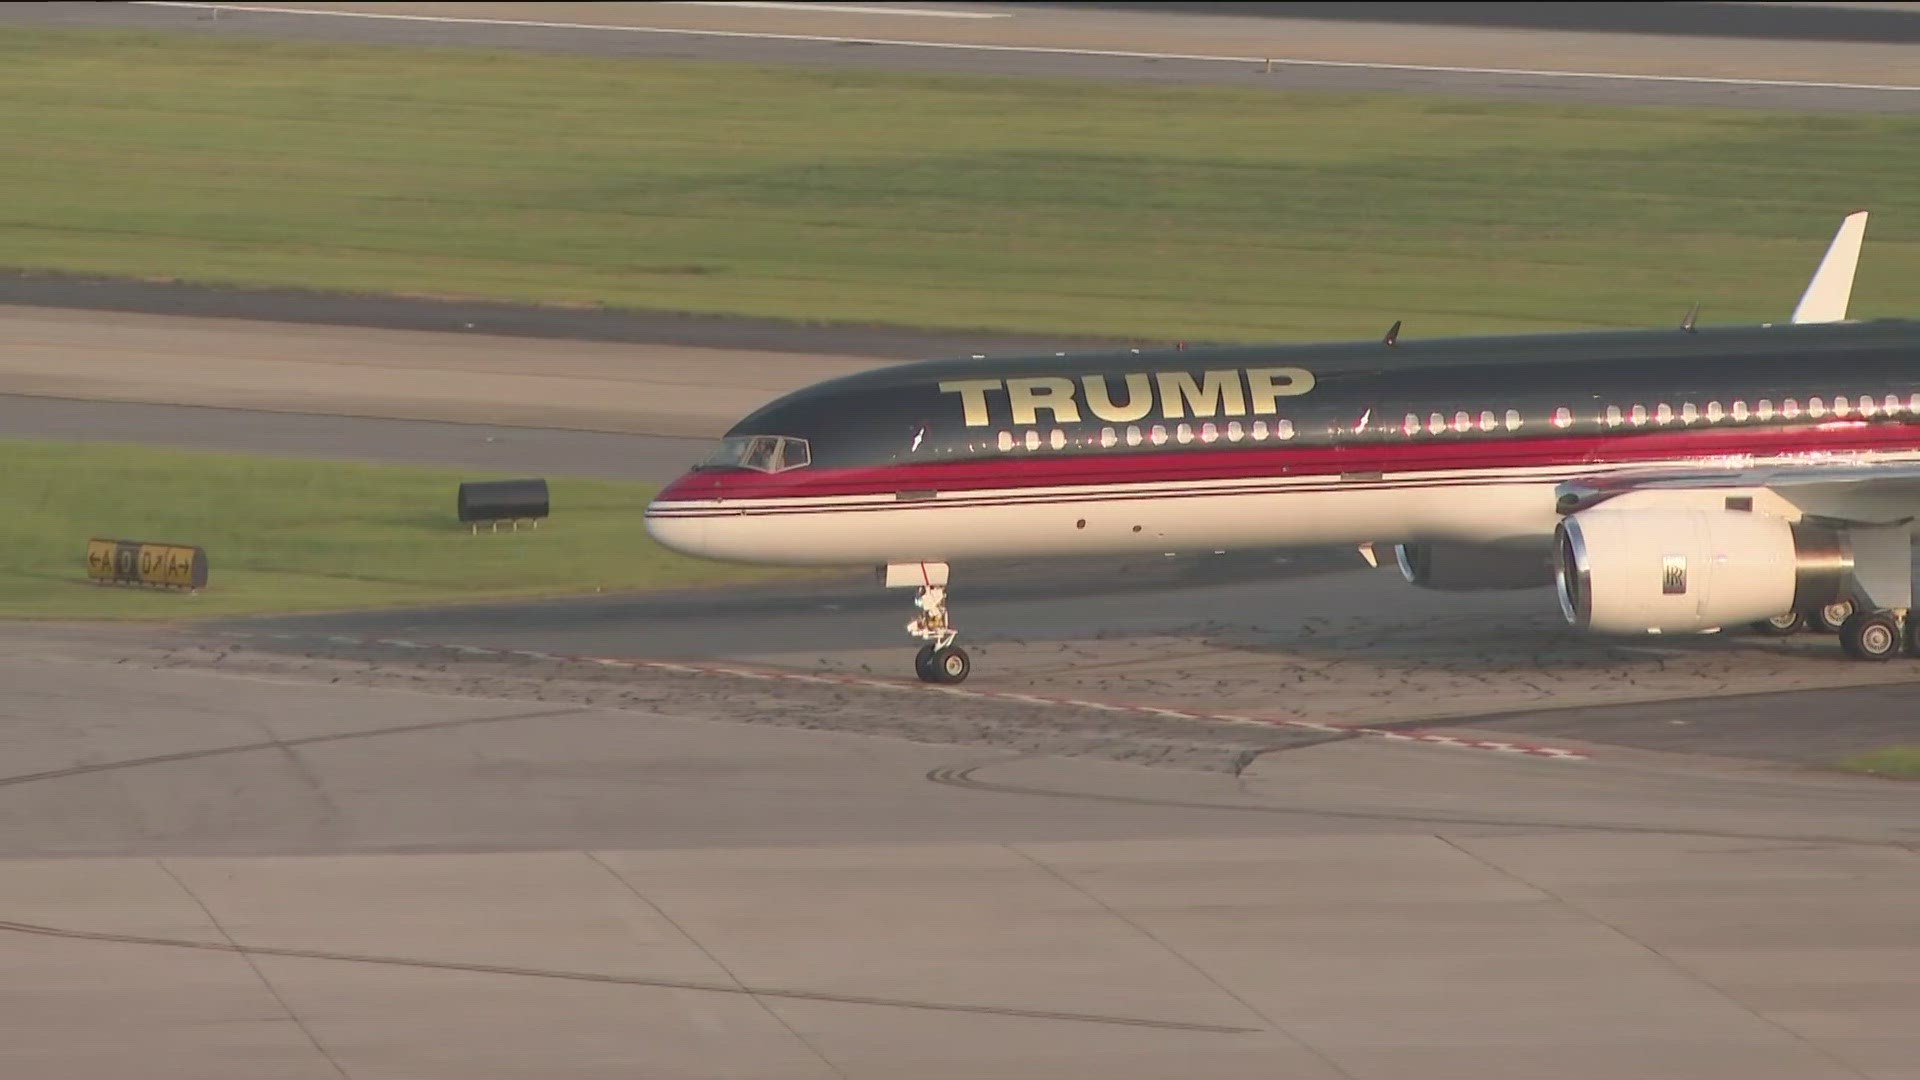 Former President Trump's plane touched down just after 7 p.m. after flying a little more than two hours from Newark, New Jersey.